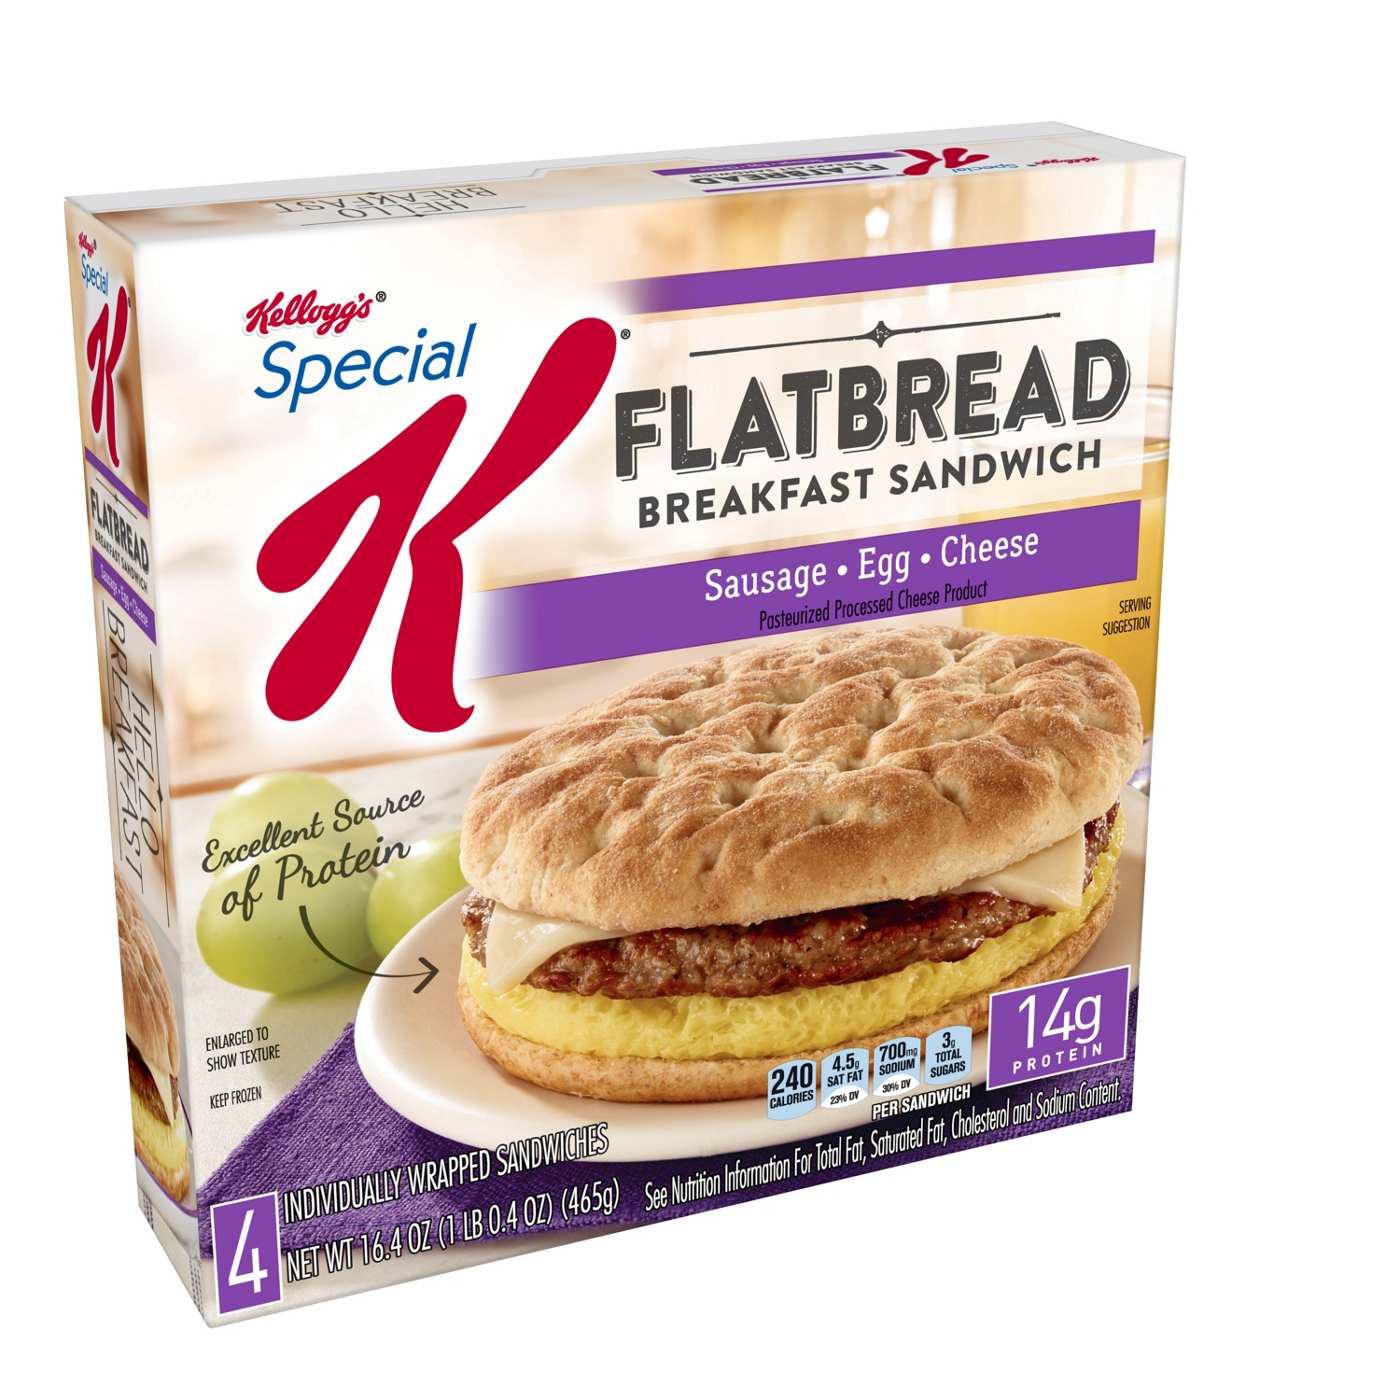 Kellogg's Special K Flatbread Breakfast Sandwiches Sausage, Egg, and Cheese; image 1 of 6